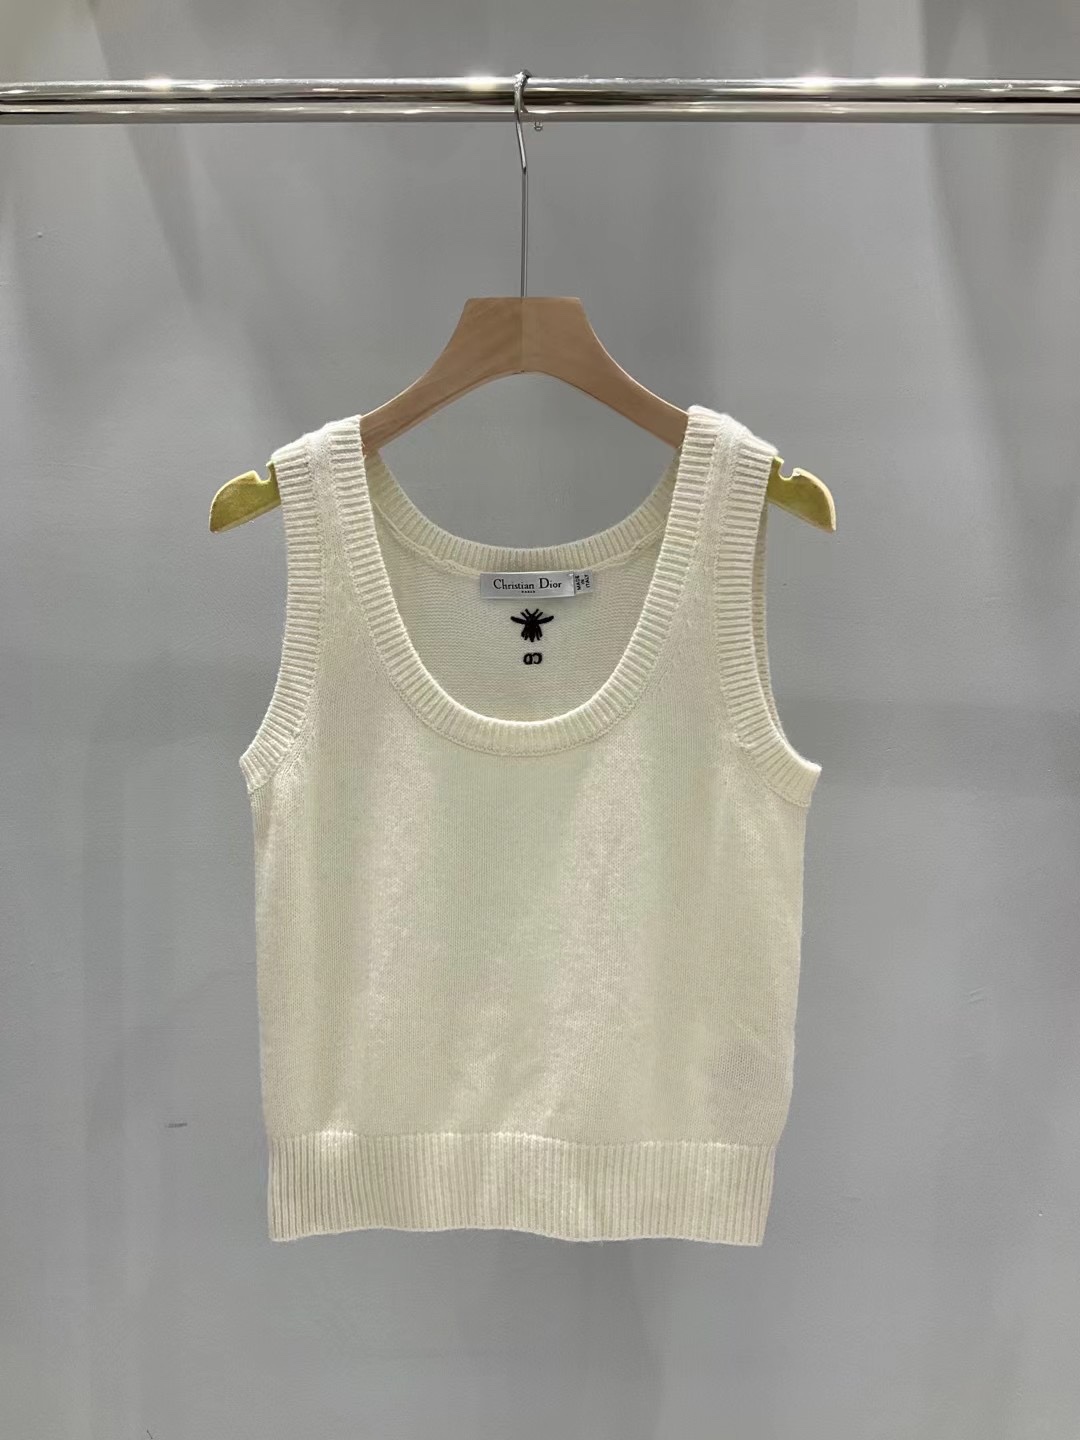 Dior Clothing Tank Tops&Camis Buy 1:1
 Embroidery Cashmere Knitting